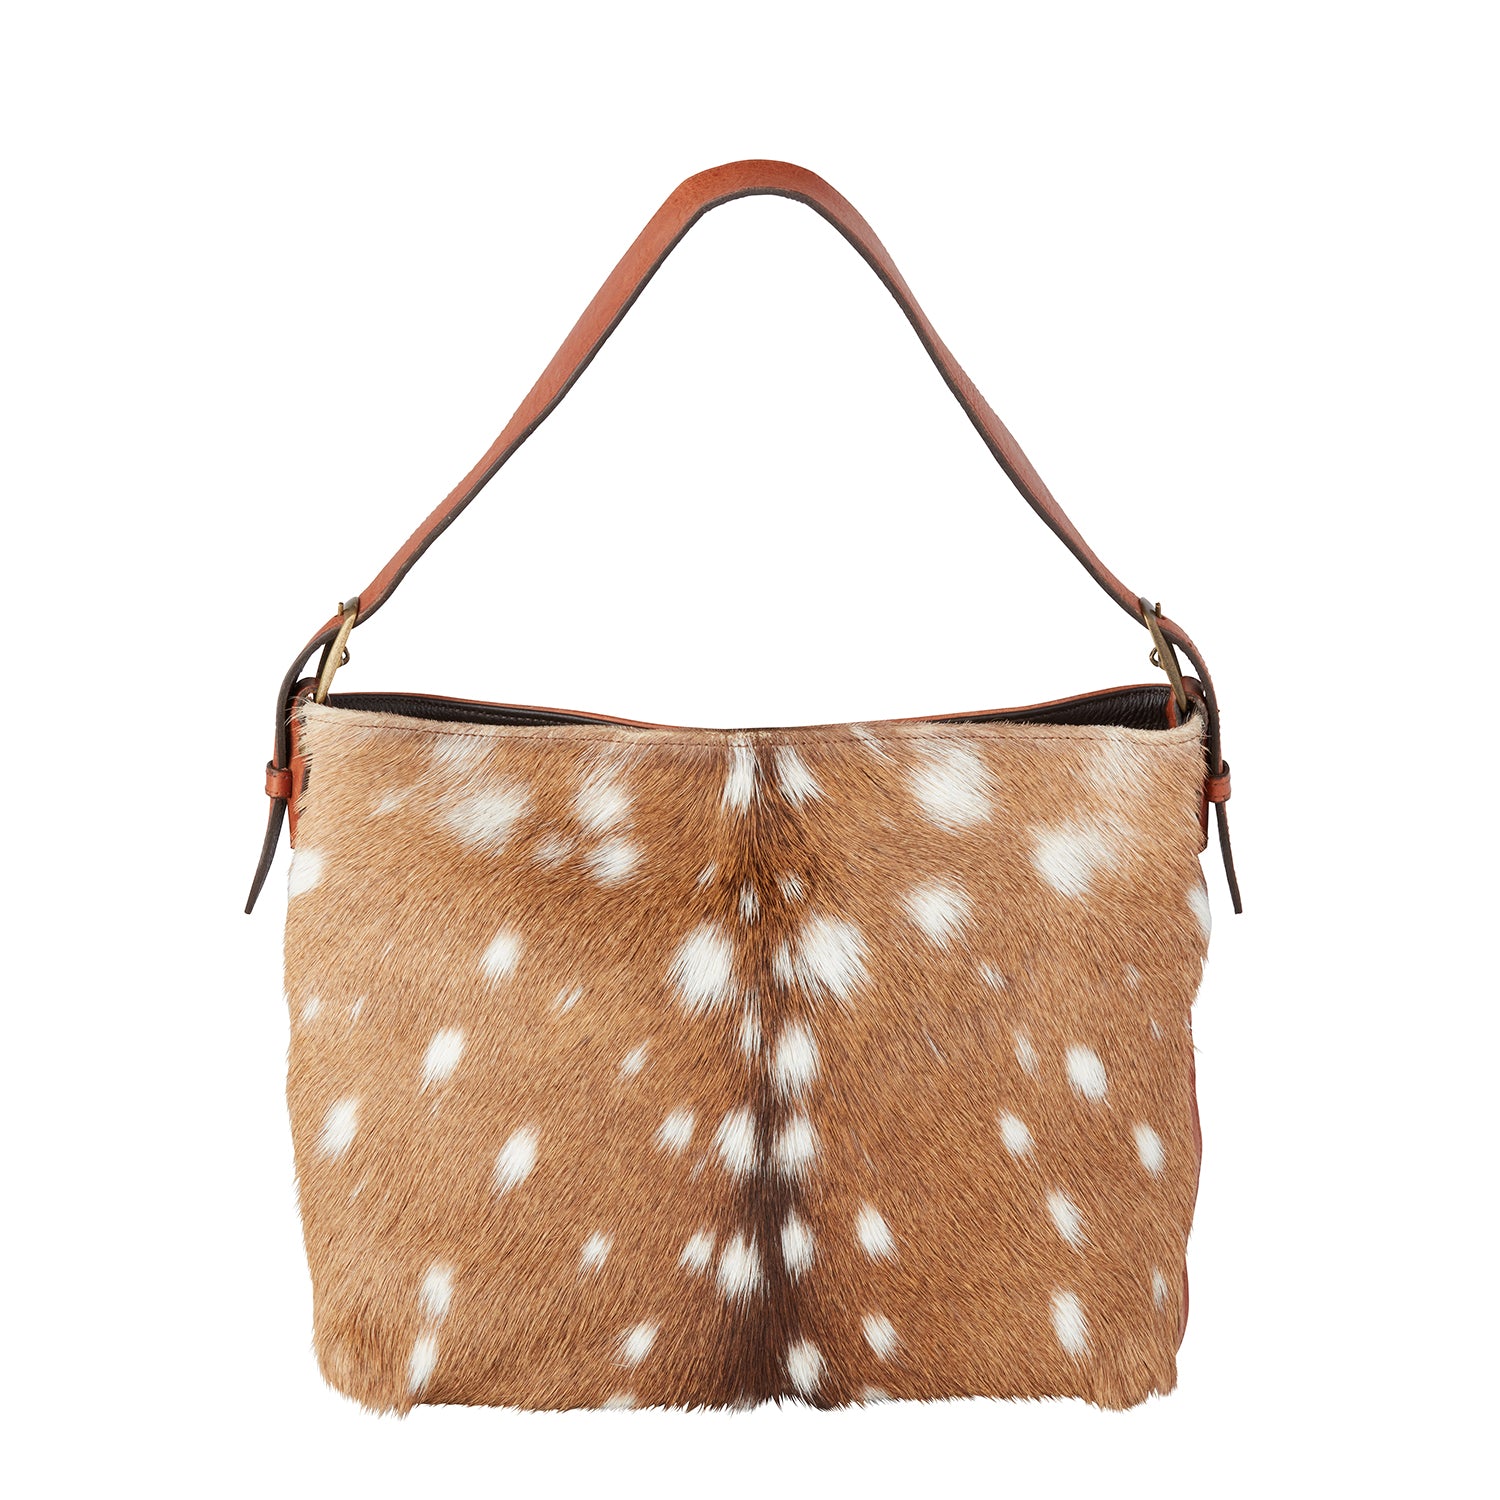 Axis Deer Skin With Tail Showcased Combined With Genuine Cowhide Leather  Medium Size - Etsy